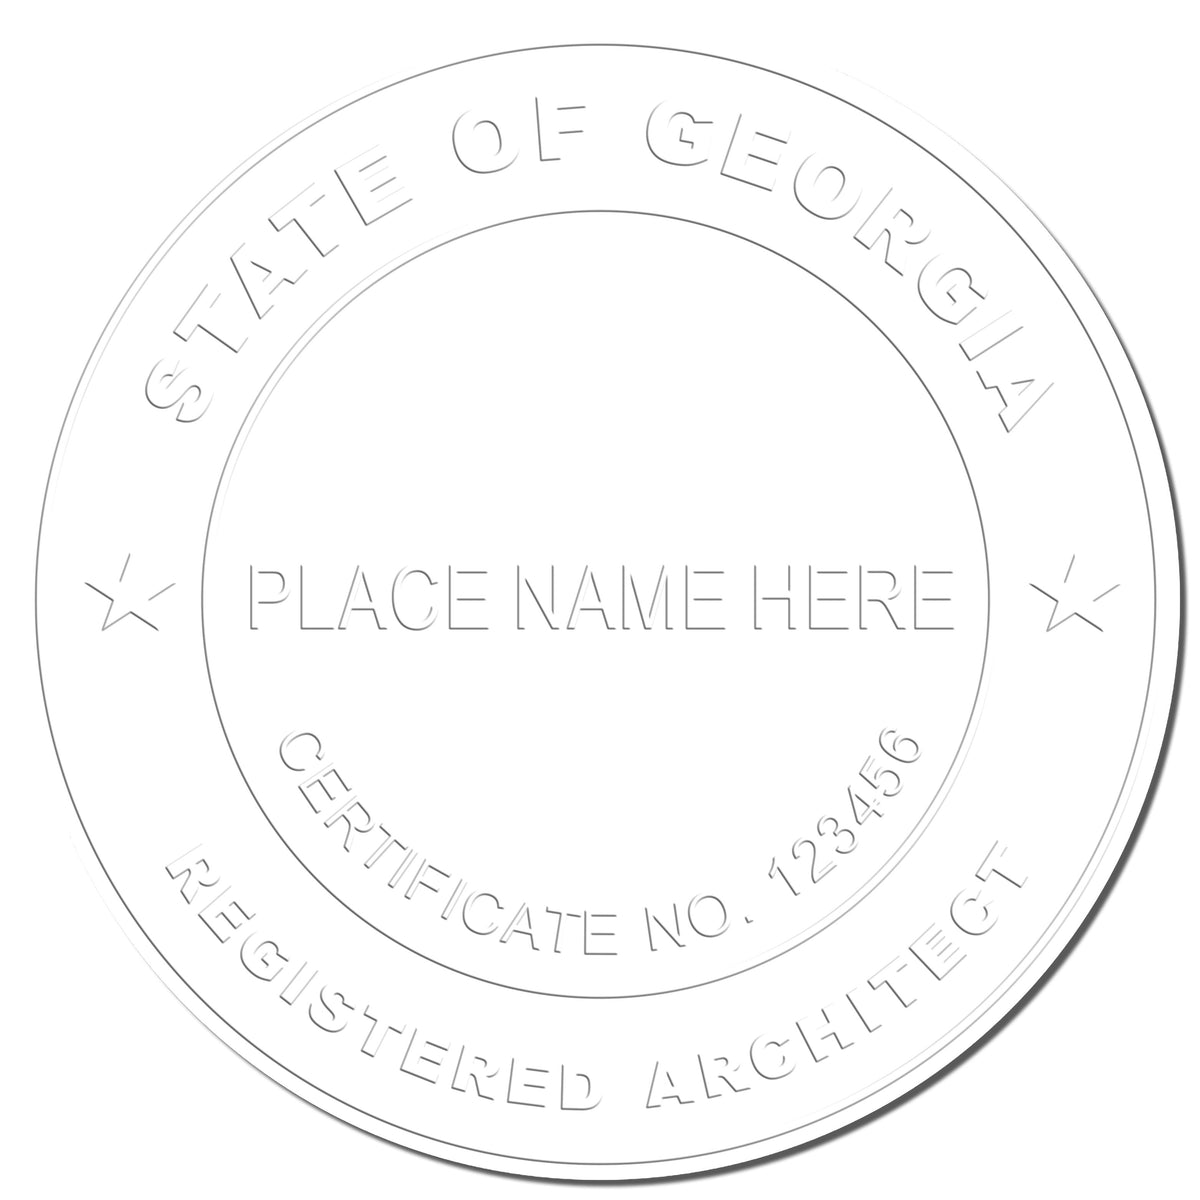 This paper is stamped with a sample imprint of the Gift Georgia Architect Seal, signifying its quality and reliability.